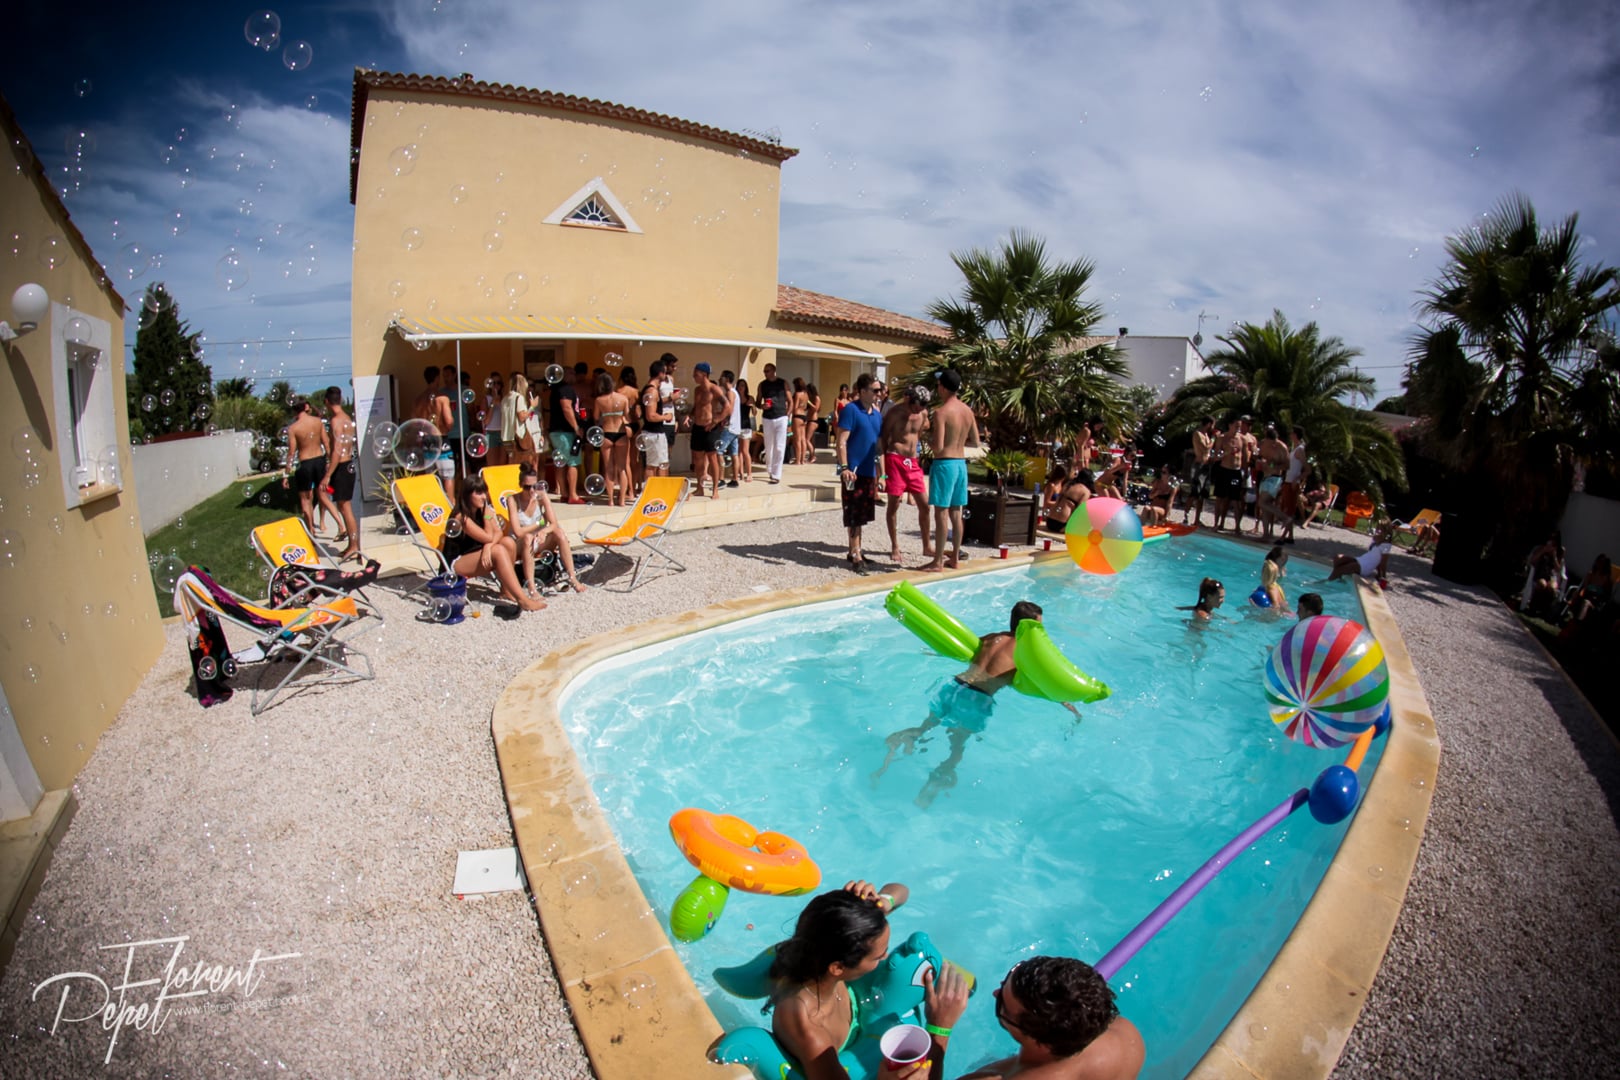 PRIVATE POOL PARTY By Loïc / CAP DAGDE / PRIVATE HOUSE / SUMMER 2014 on Vimeo